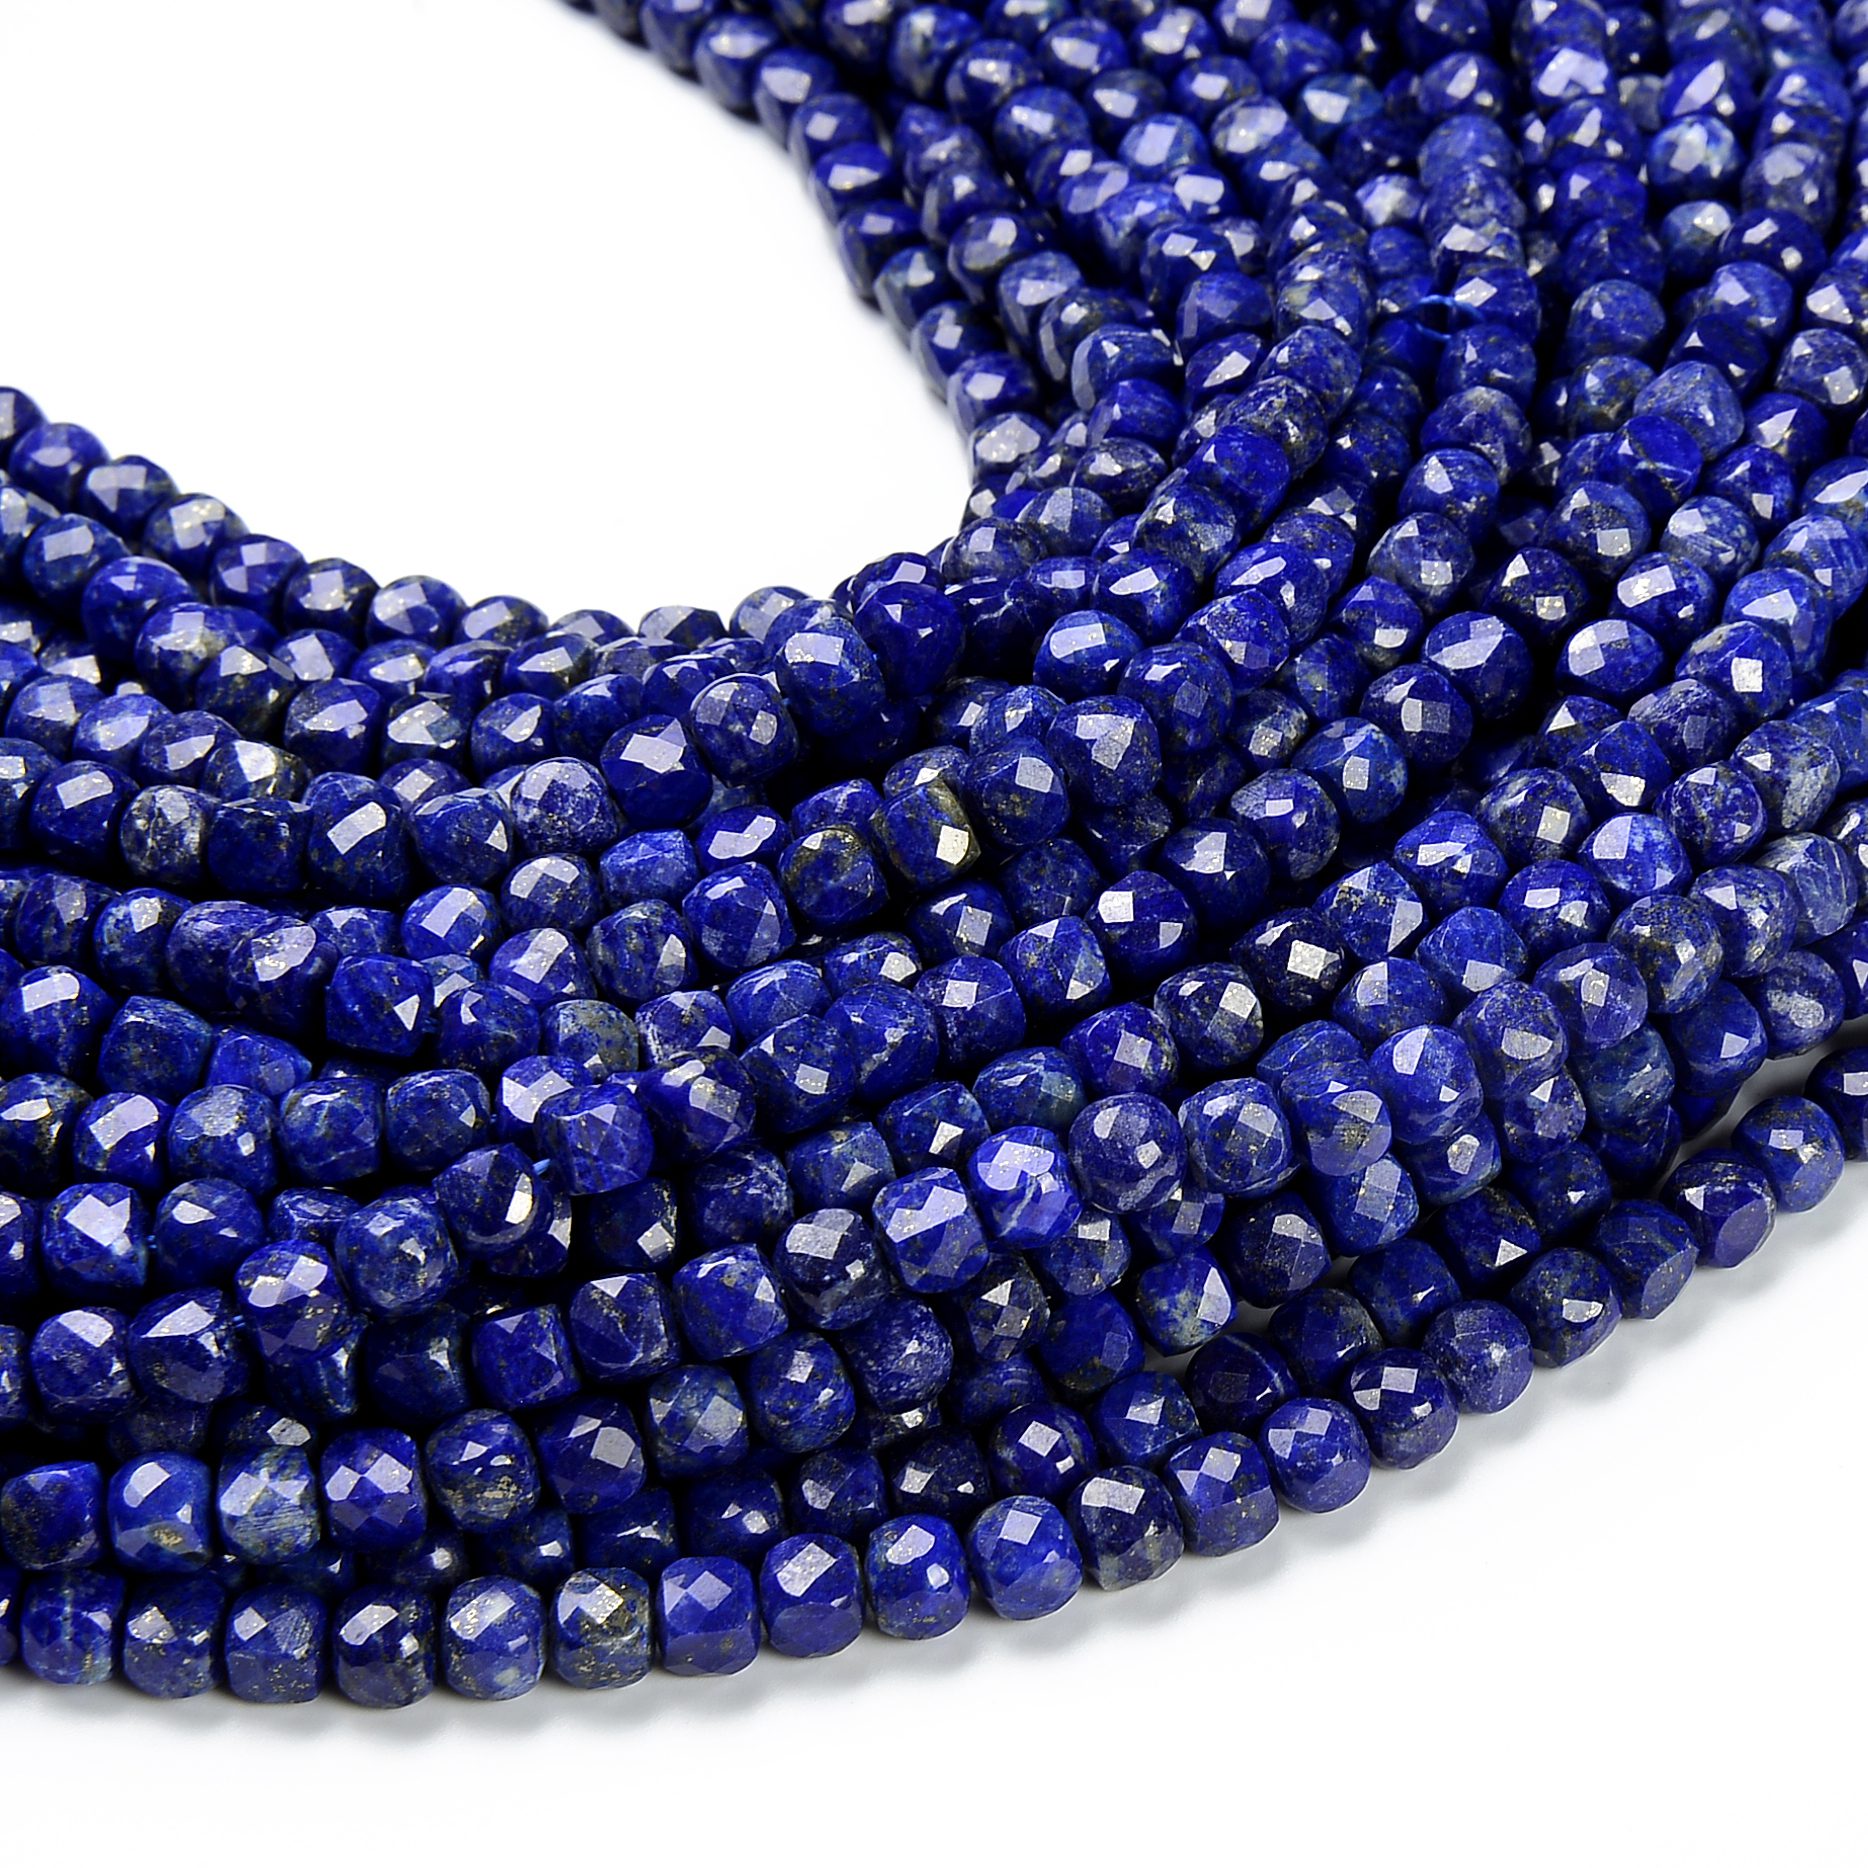 6mm Natural Full 15.5 Inch Strand Gemstone Beads PRP442 Natural Lapis No Dye High Quality in Faceted Round